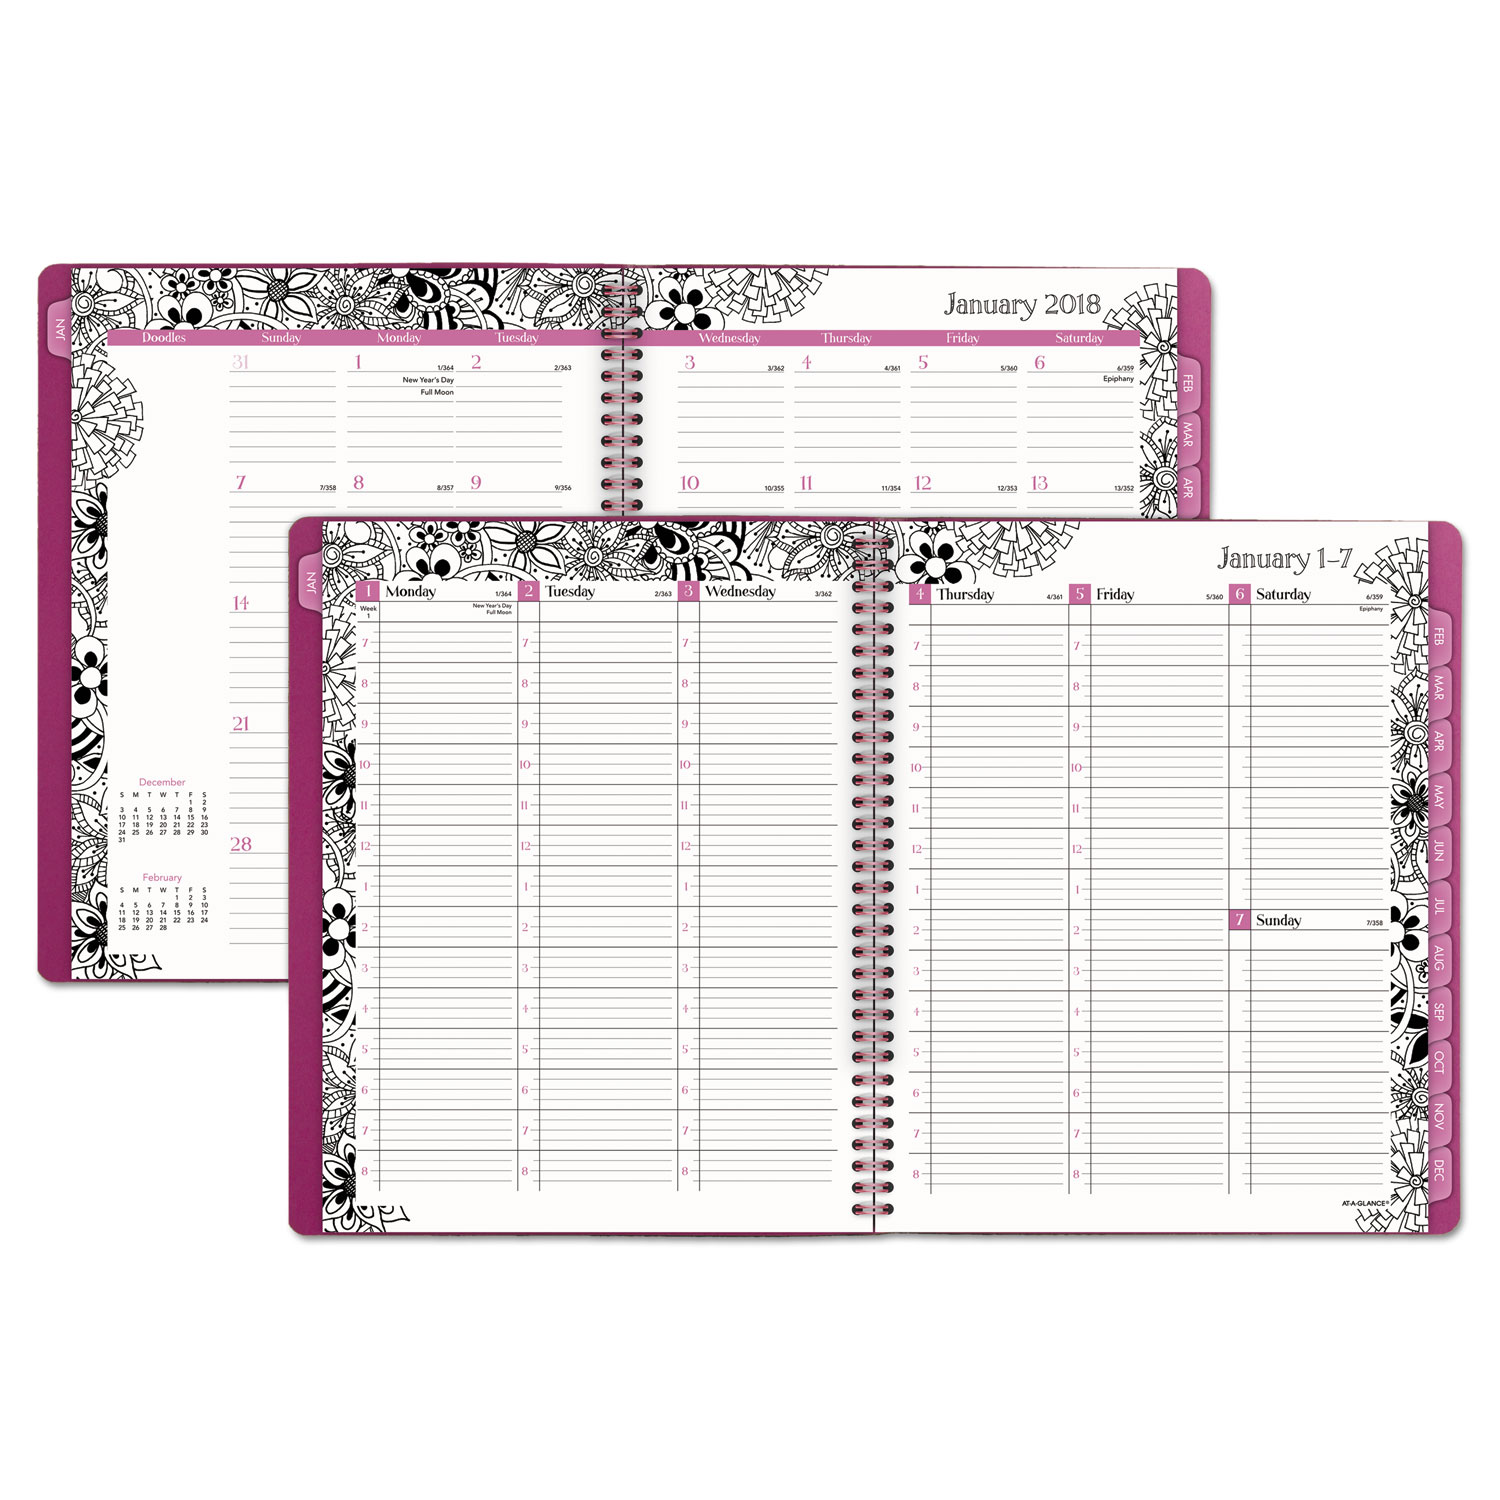 Floradoodle Professional Weekly/Monthly Planner, 9 3/8 x 11 3/8, 2018-2019